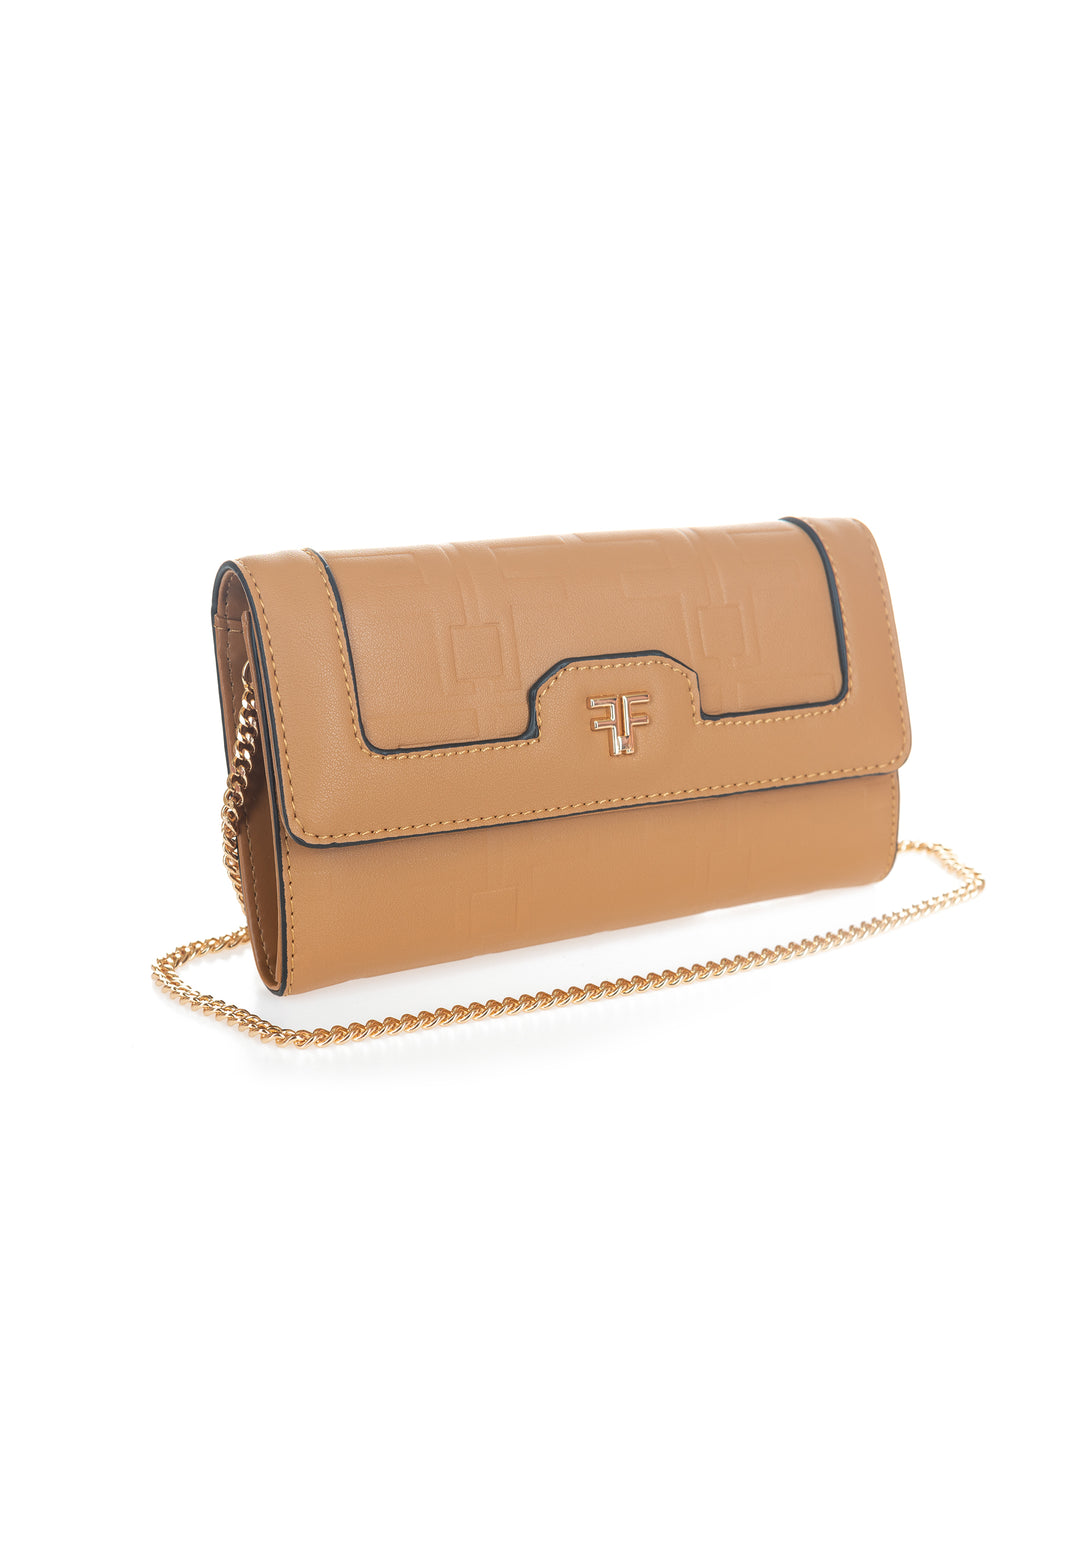 Pochette bag made in eco leather with logo